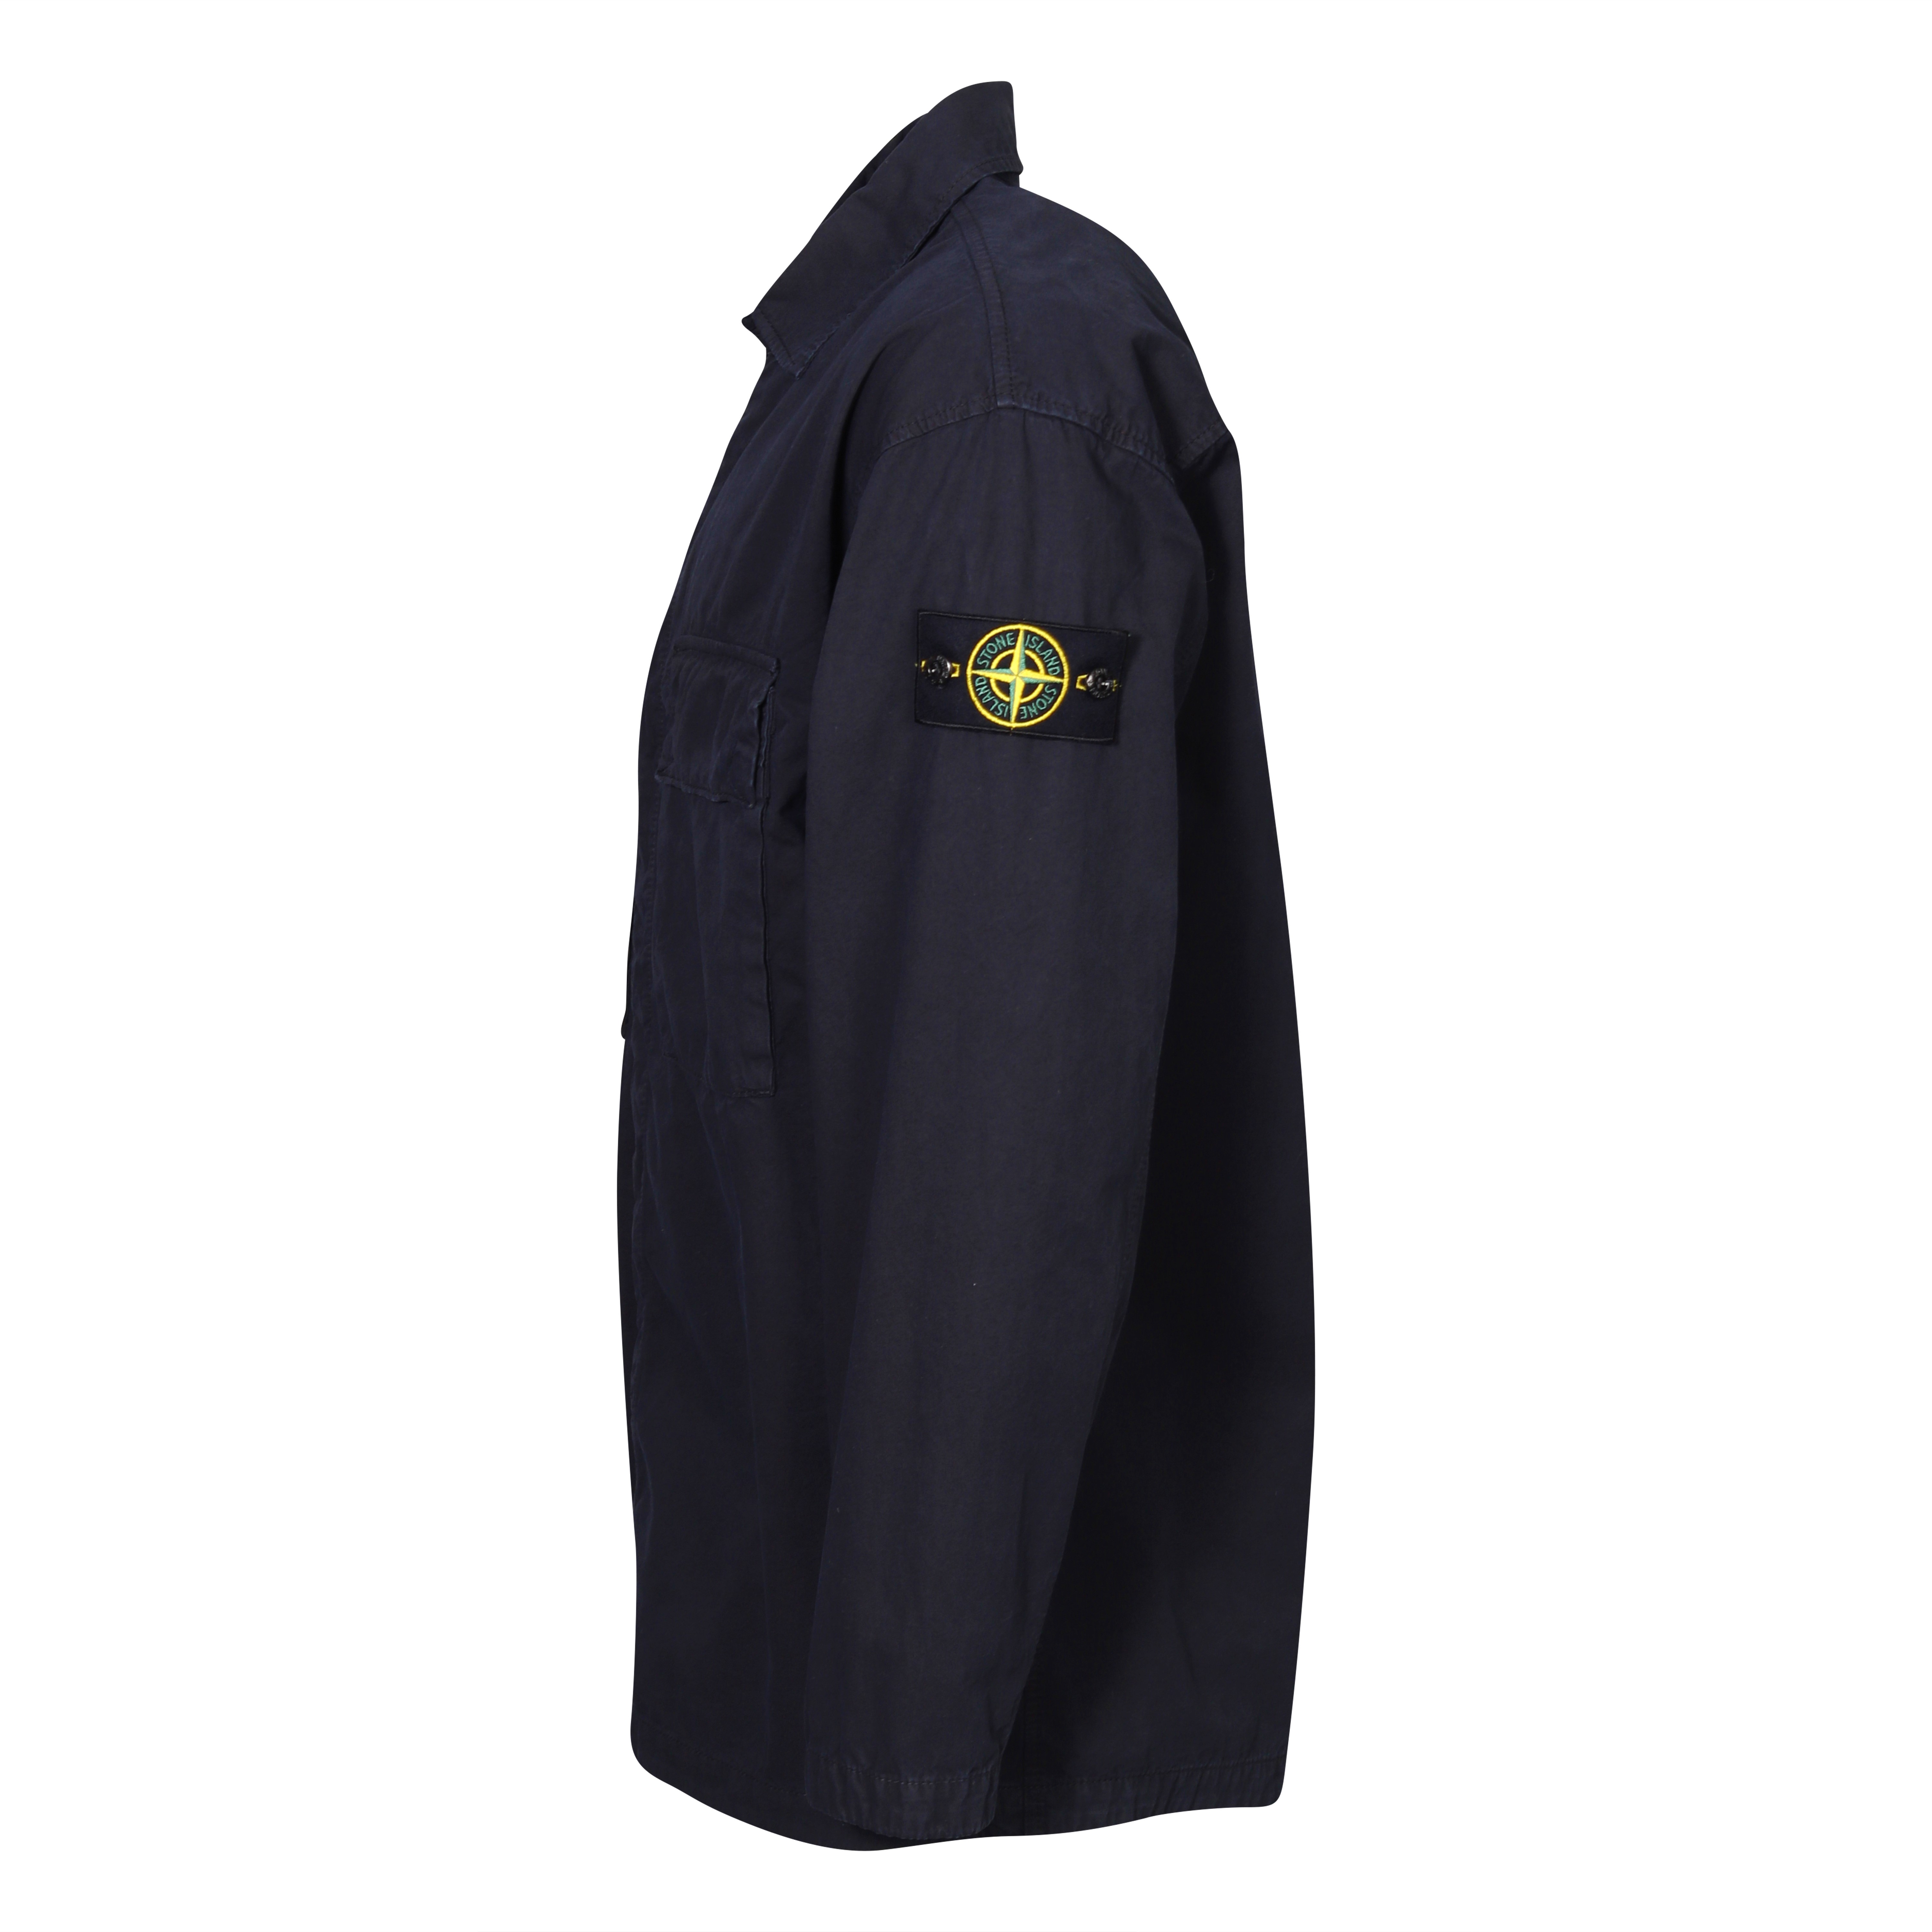 STONE ISLAND Cotton Overshirt in Washed Navy S